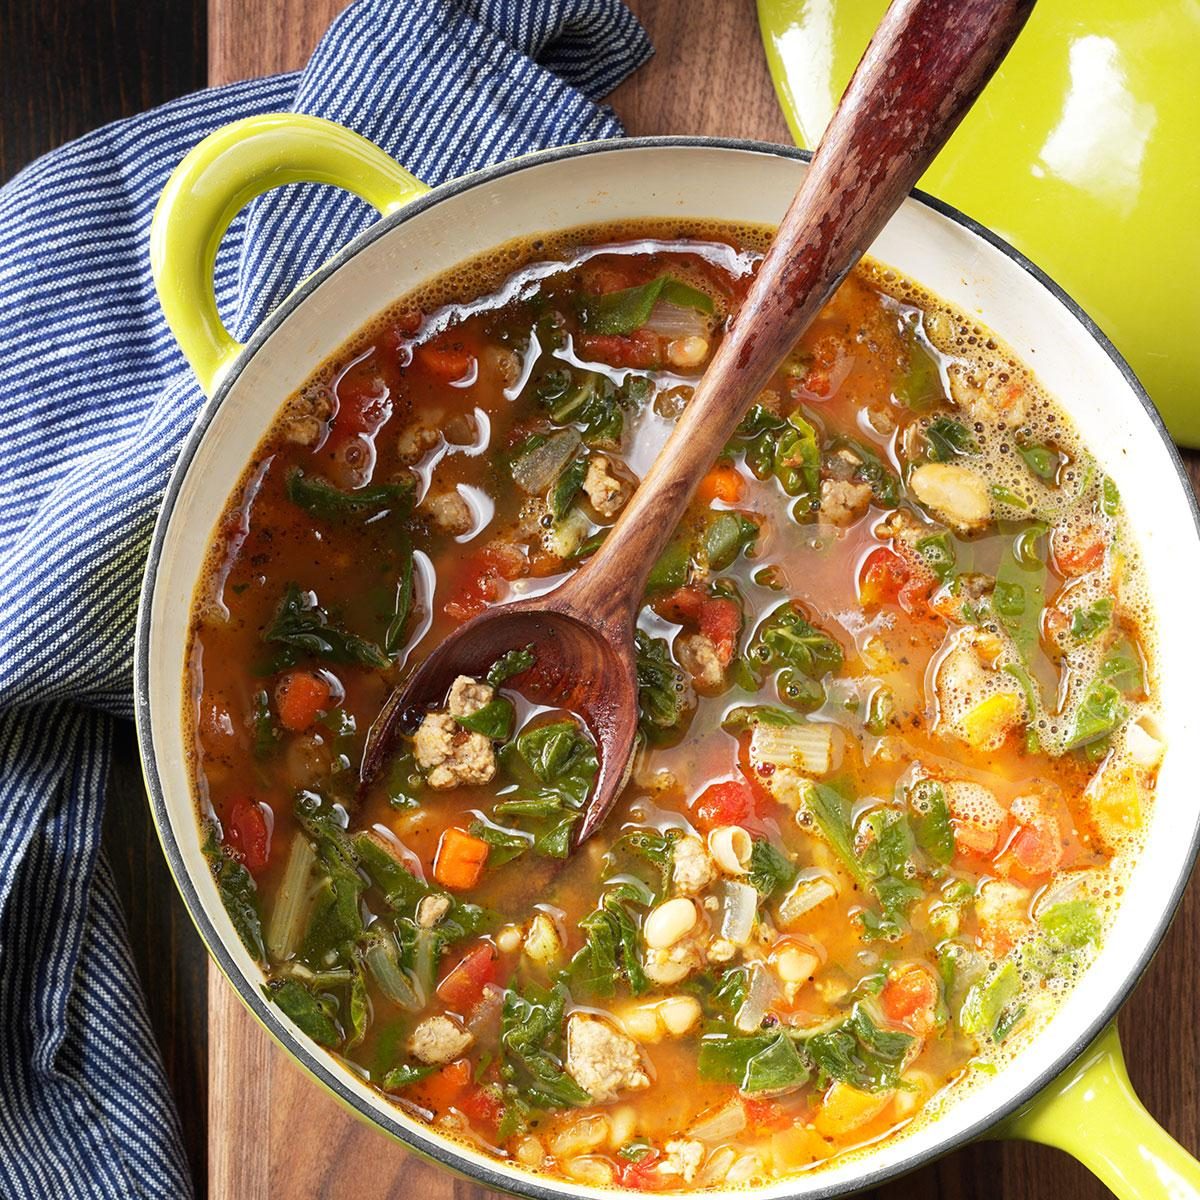 50 Soup Recipes to Make for a Cozy Dinner